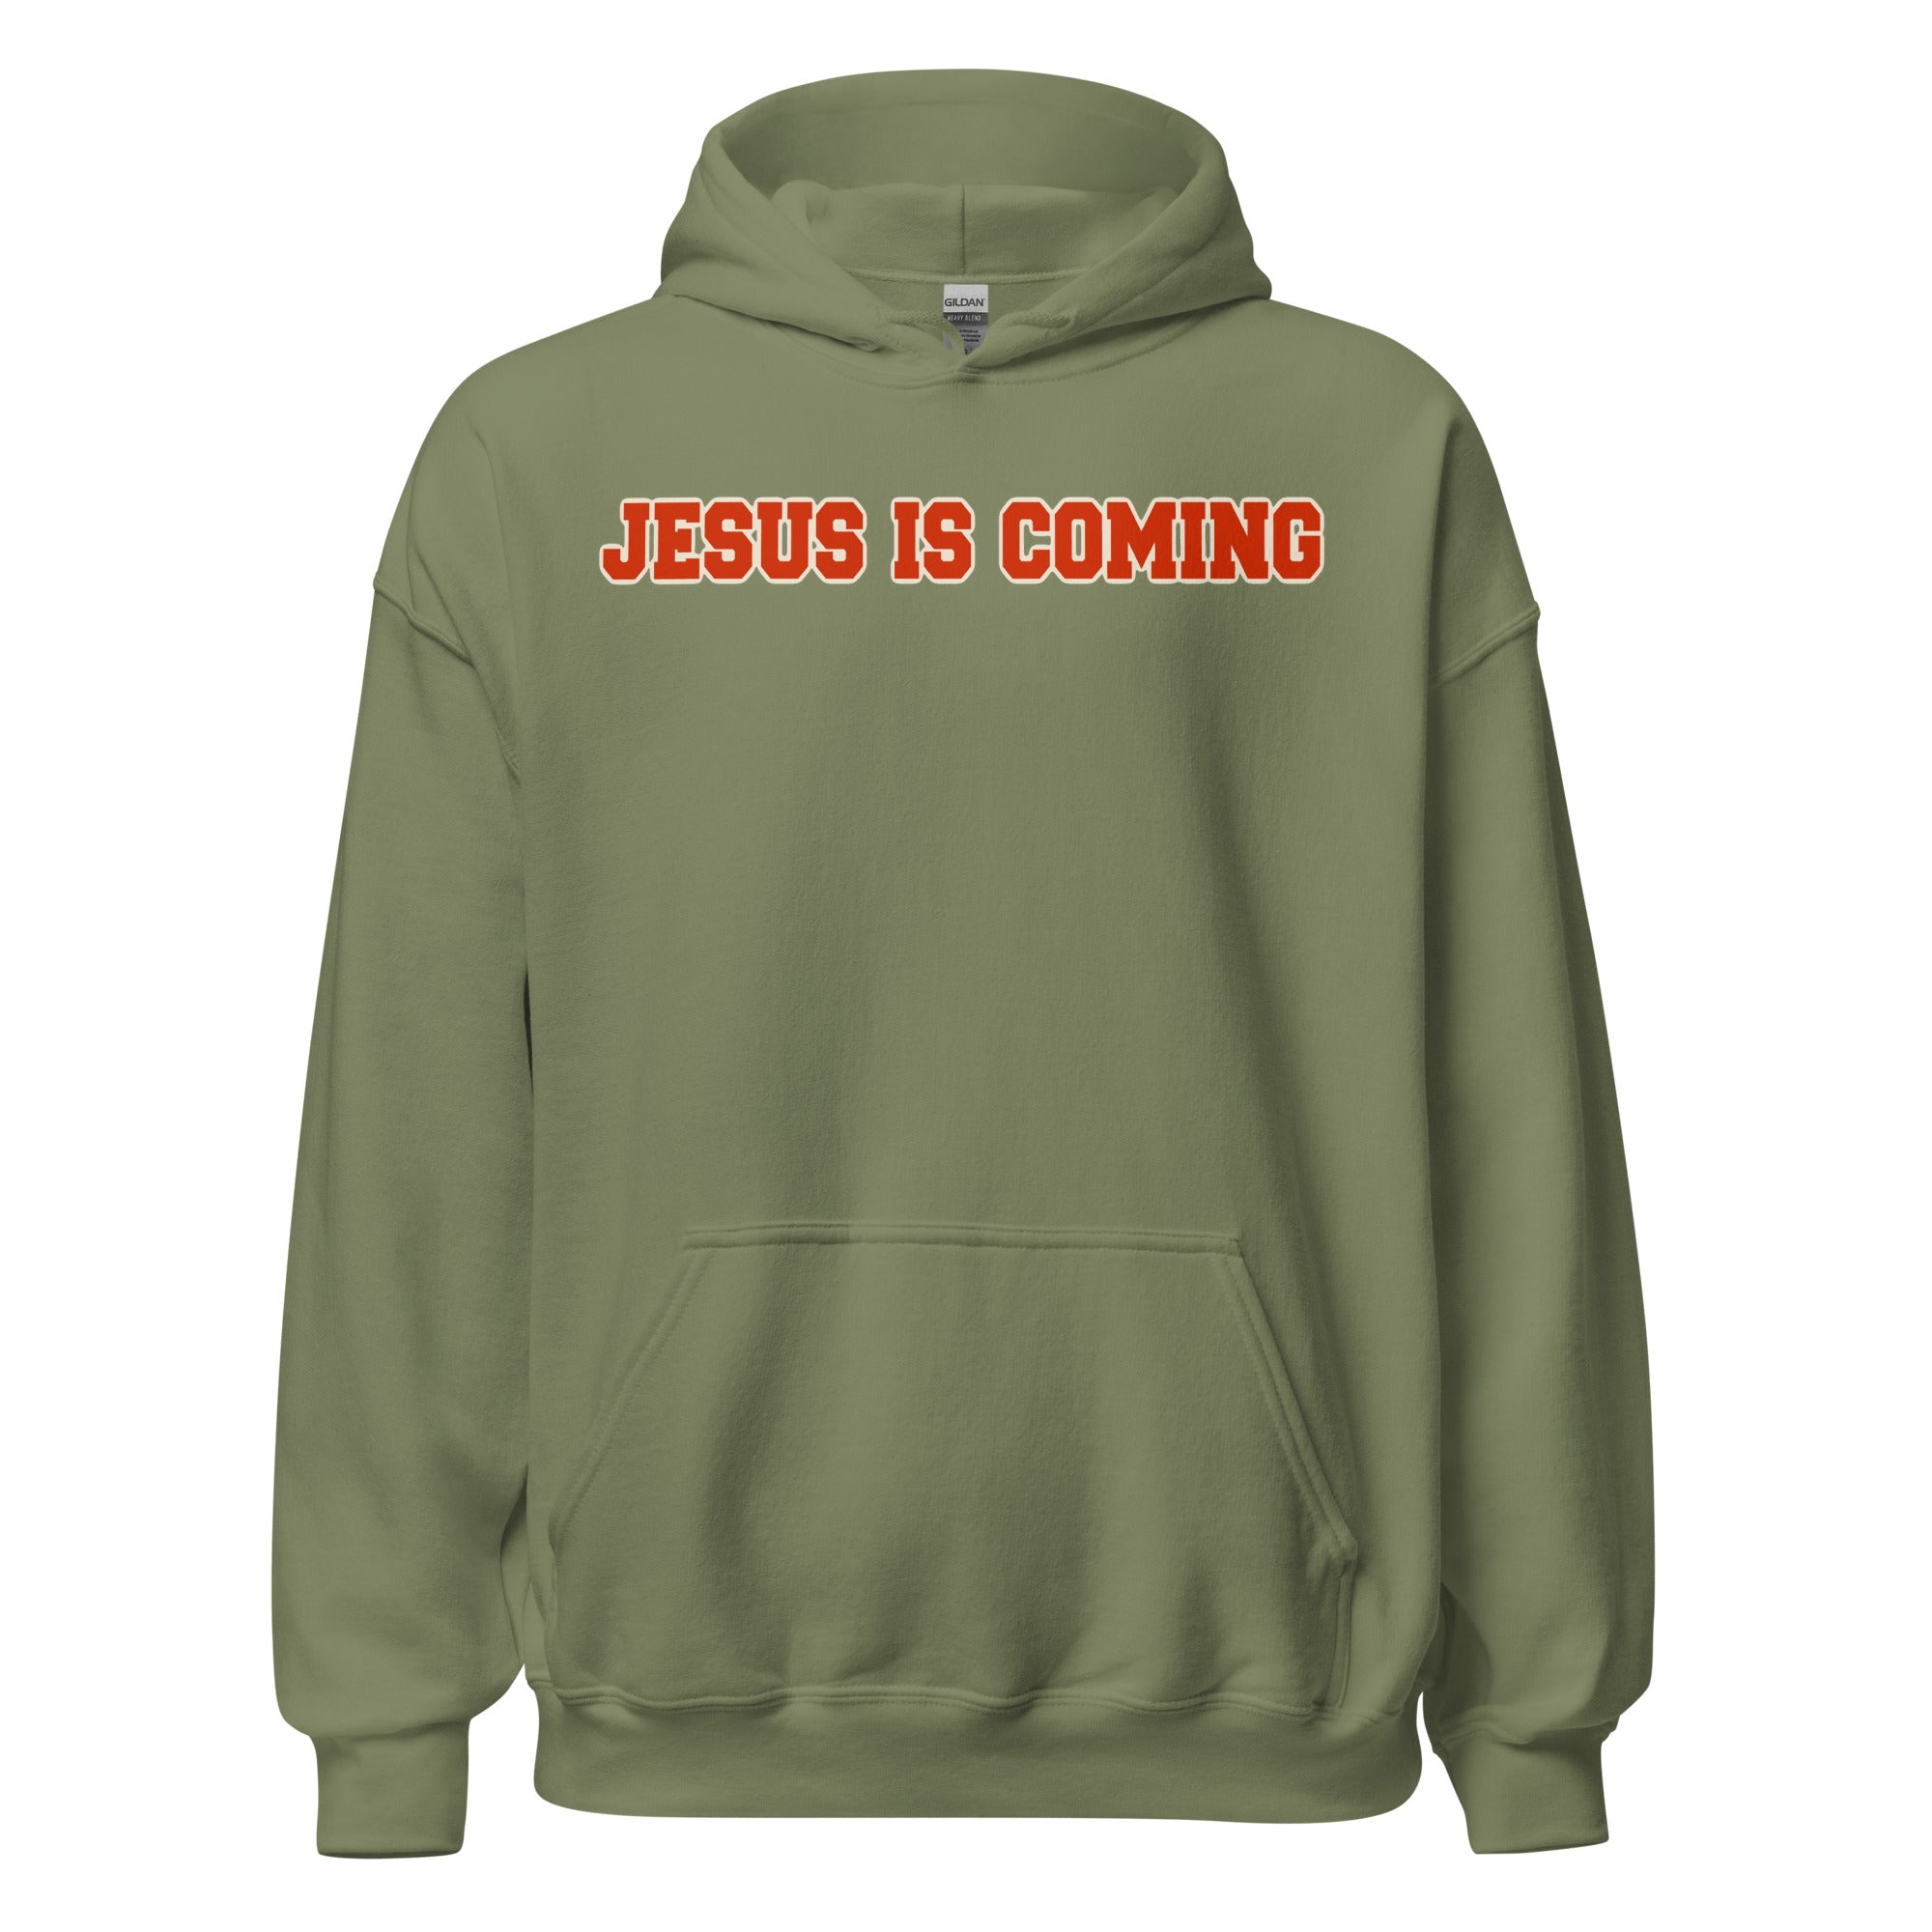 The 2nd Coming Unisex Hoodie